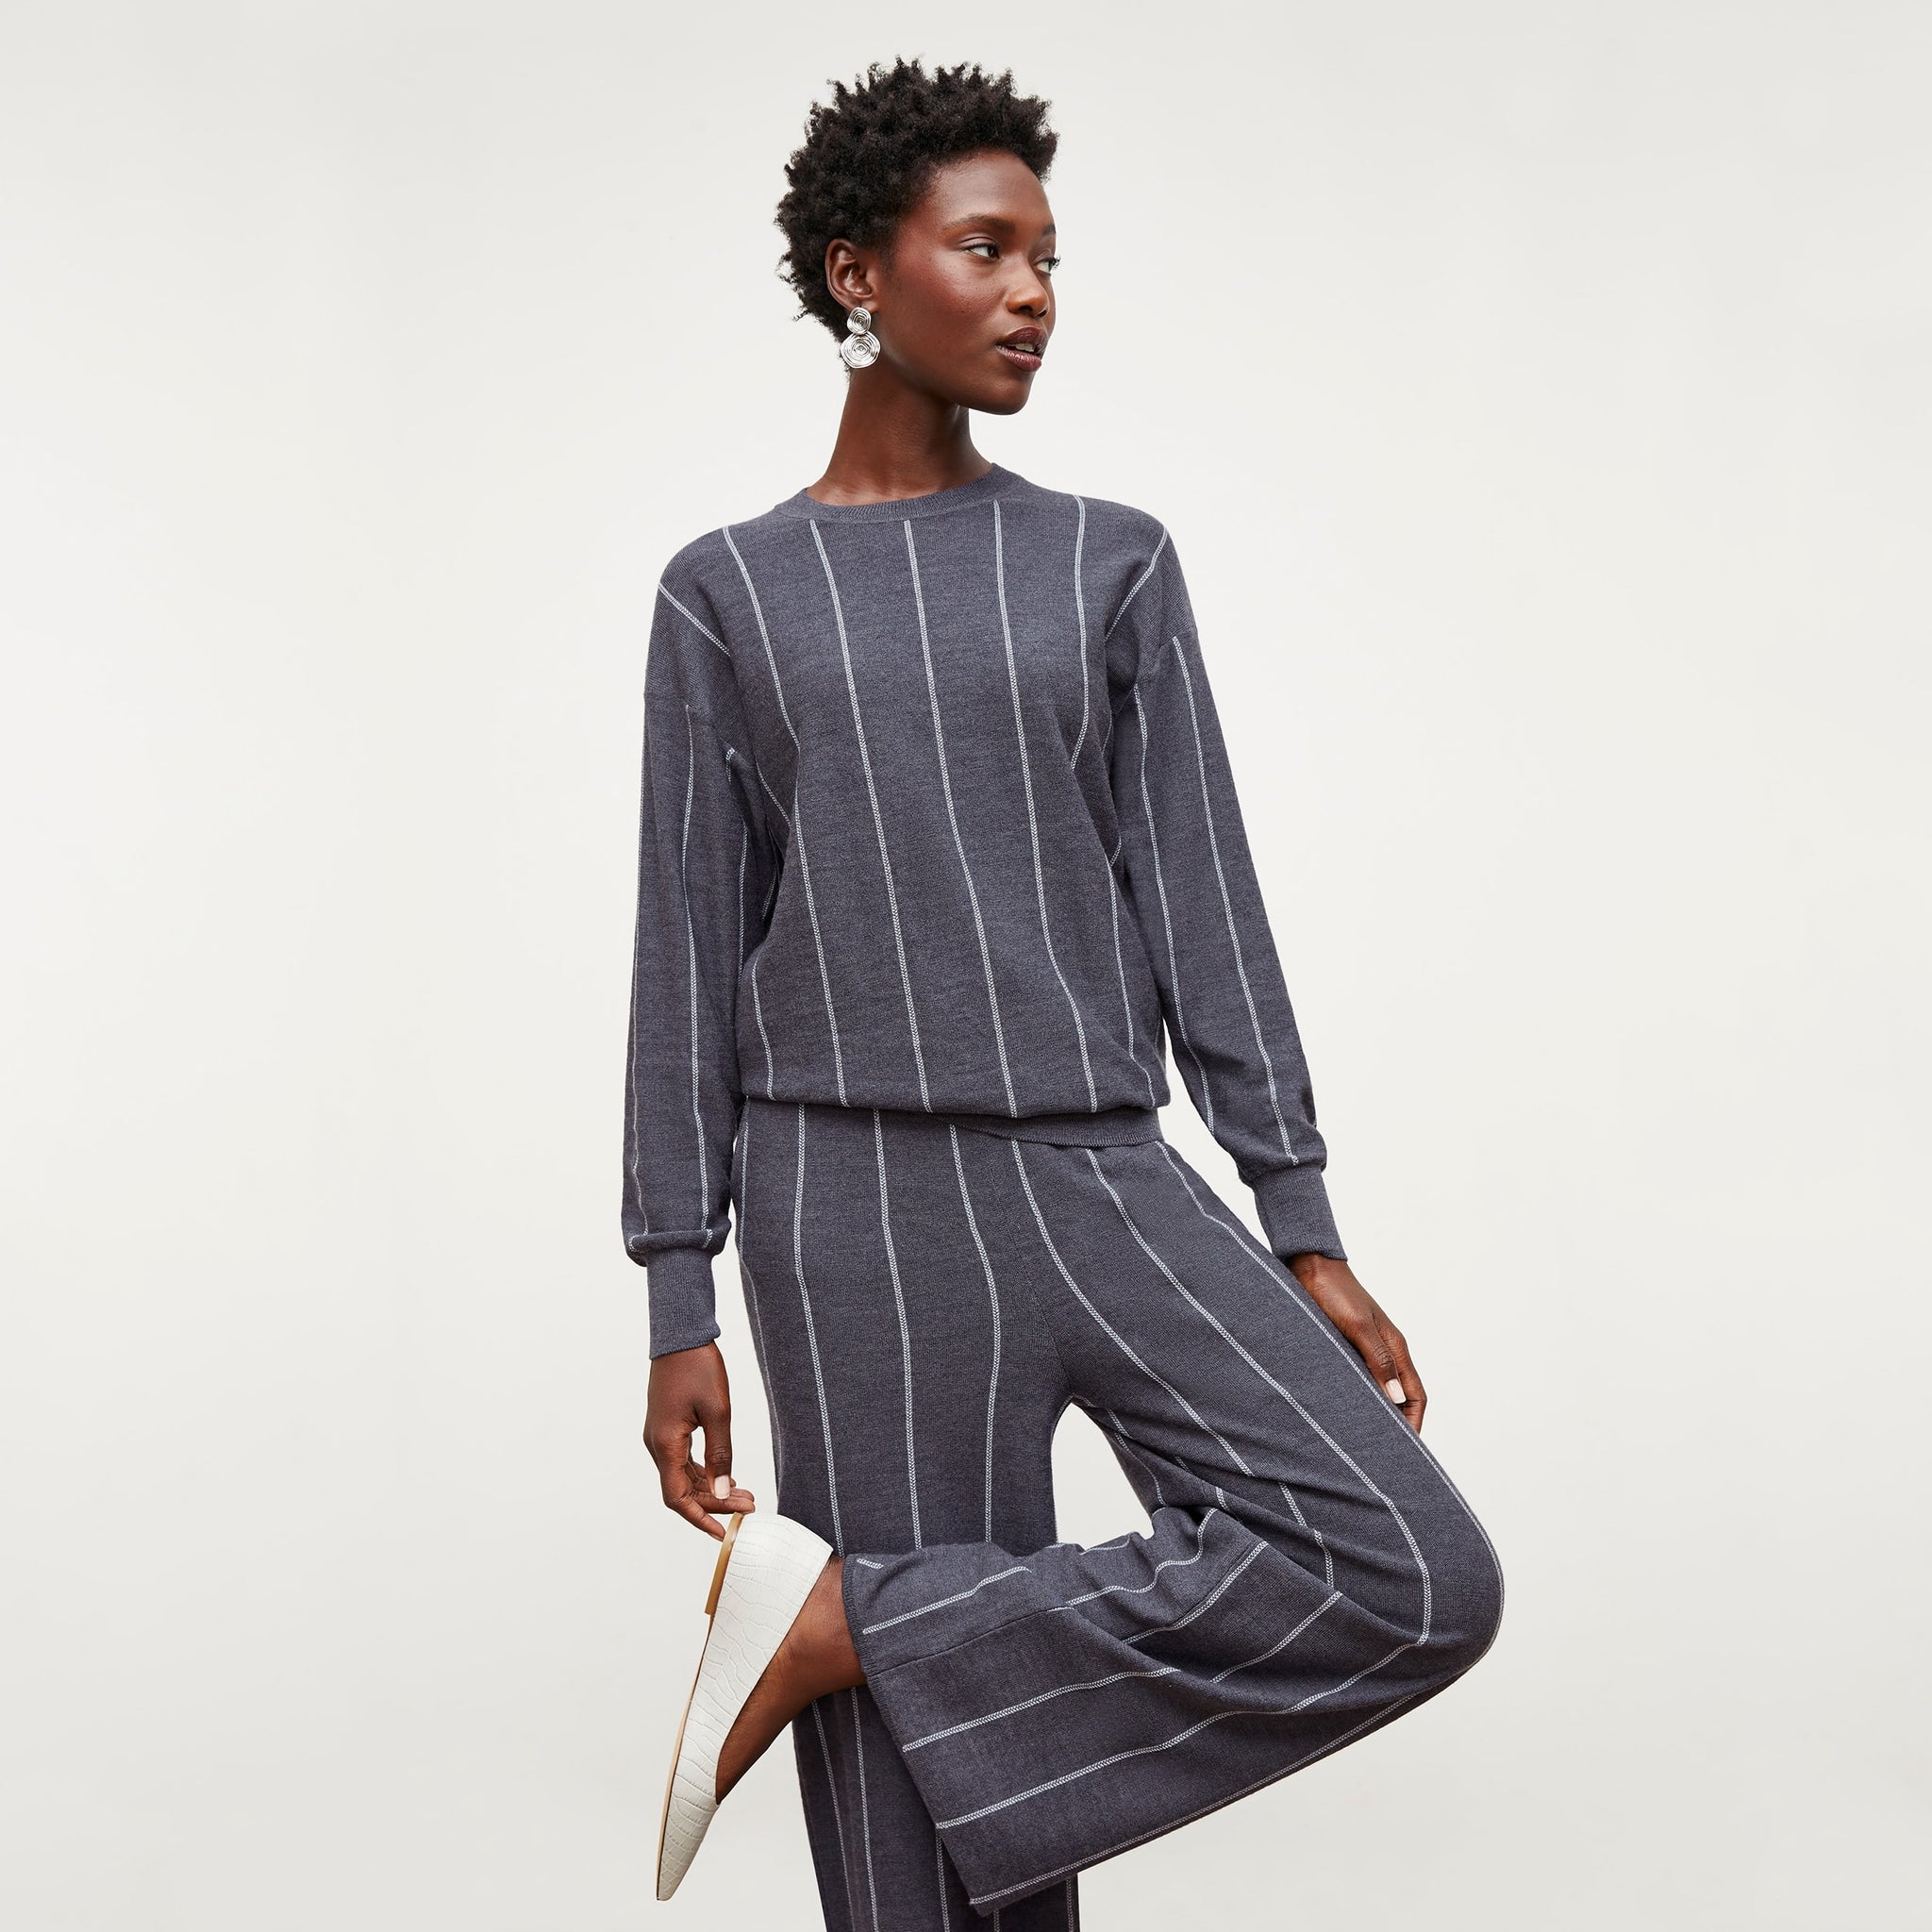 Front image of a woman standing wearing the Ingola Sweater—Braided Stripe in Charcoal / Ivory 